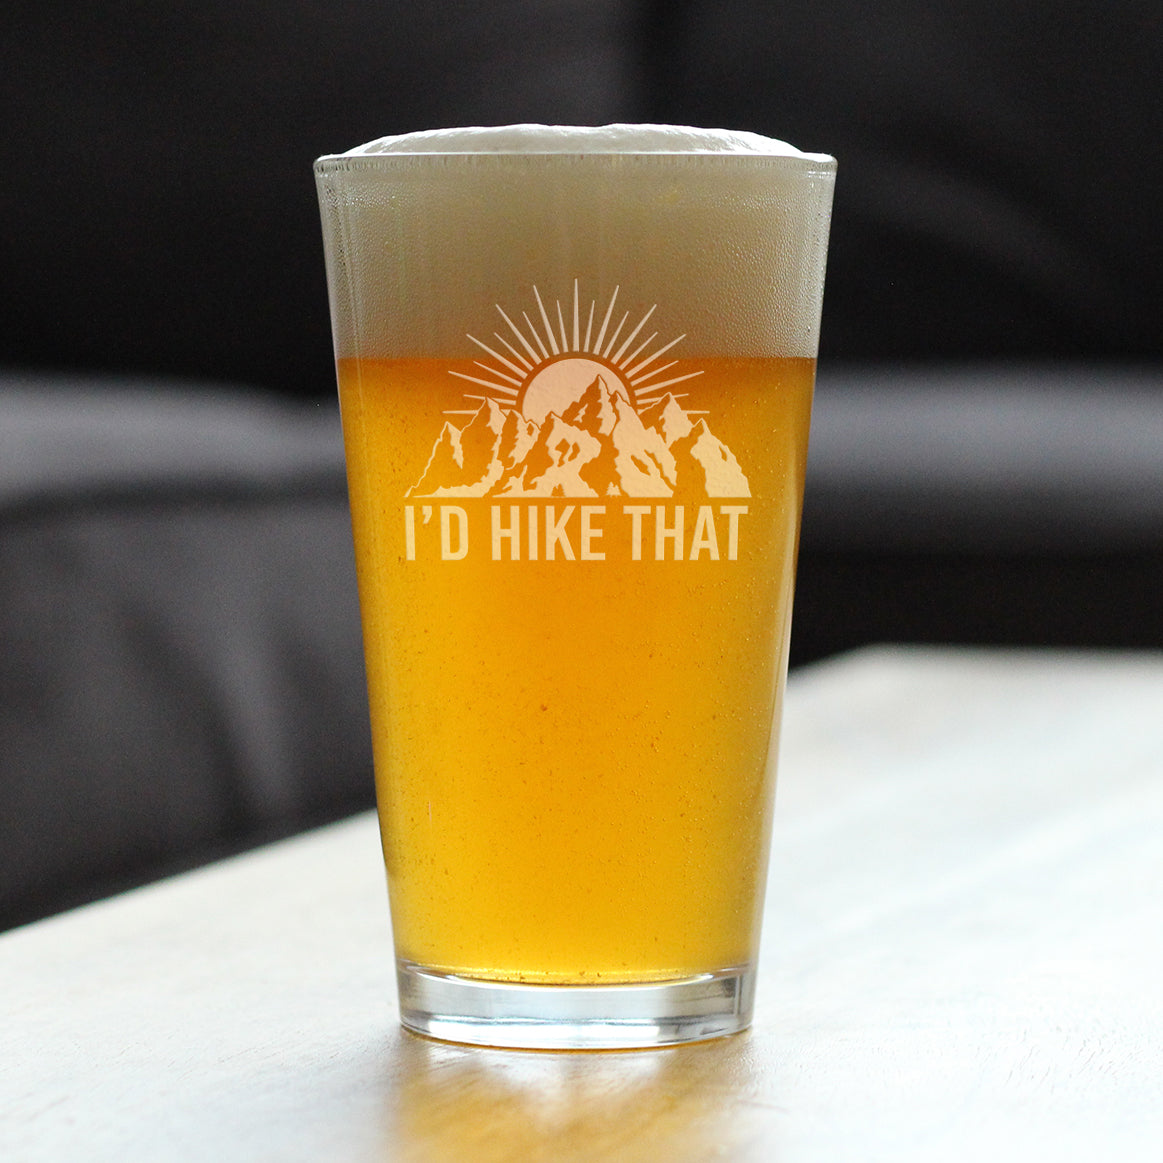 I&#39;d Hike That - Pint Glass for Beer - Cool Hiking Themed Decor and Gifts for Mountain Lovers - 16 oz Glasses